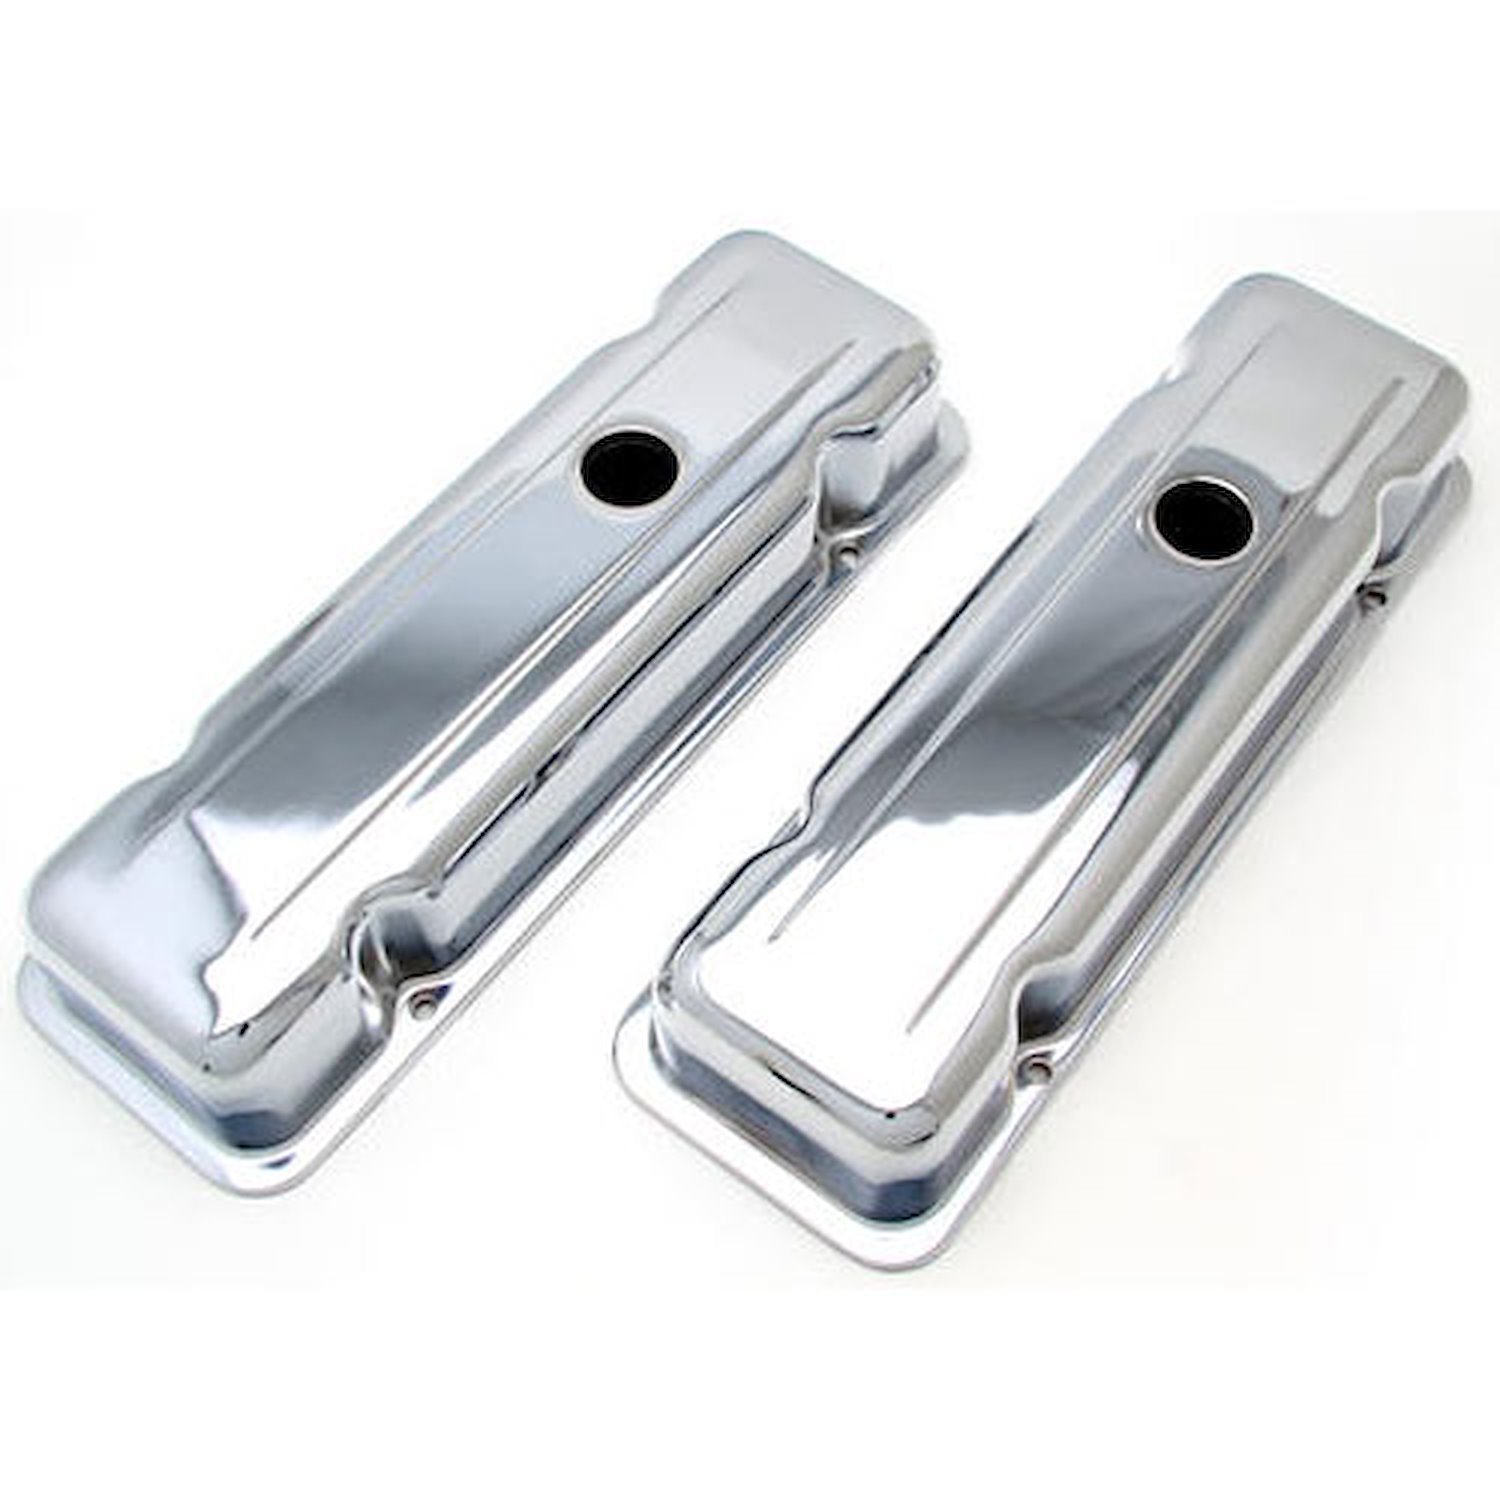 Chrome Plated Steel Valve Covers 1980-1984 Chevy 6-Cylinder